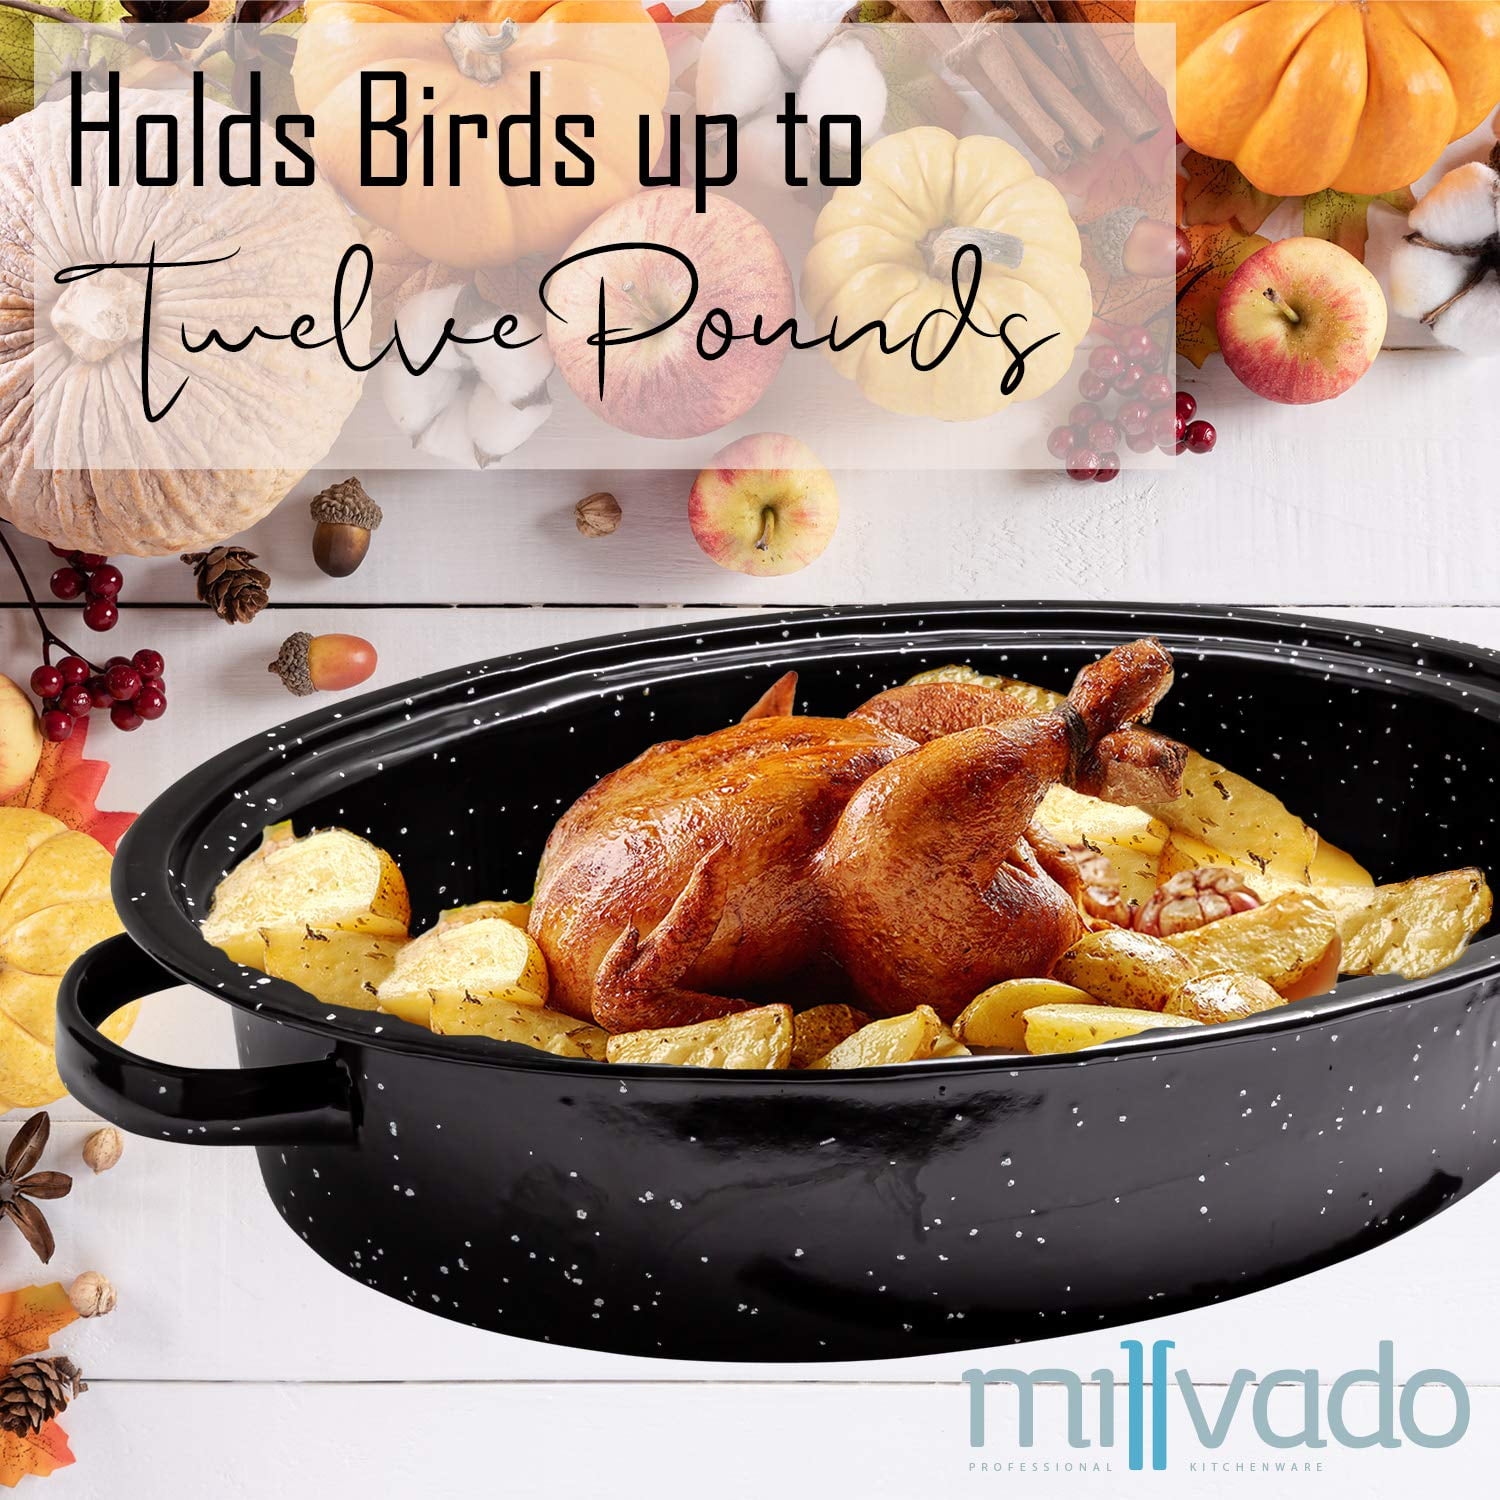  Millvado Roasting Pan With Lid, Thanksgiving Turkey Roaster Pan,  Extra Large 20 lb Capacity, 19 Granite Oven Roaster Oval Shaped Speckled  Enamel on Steel Cookware: Home & Kitchen